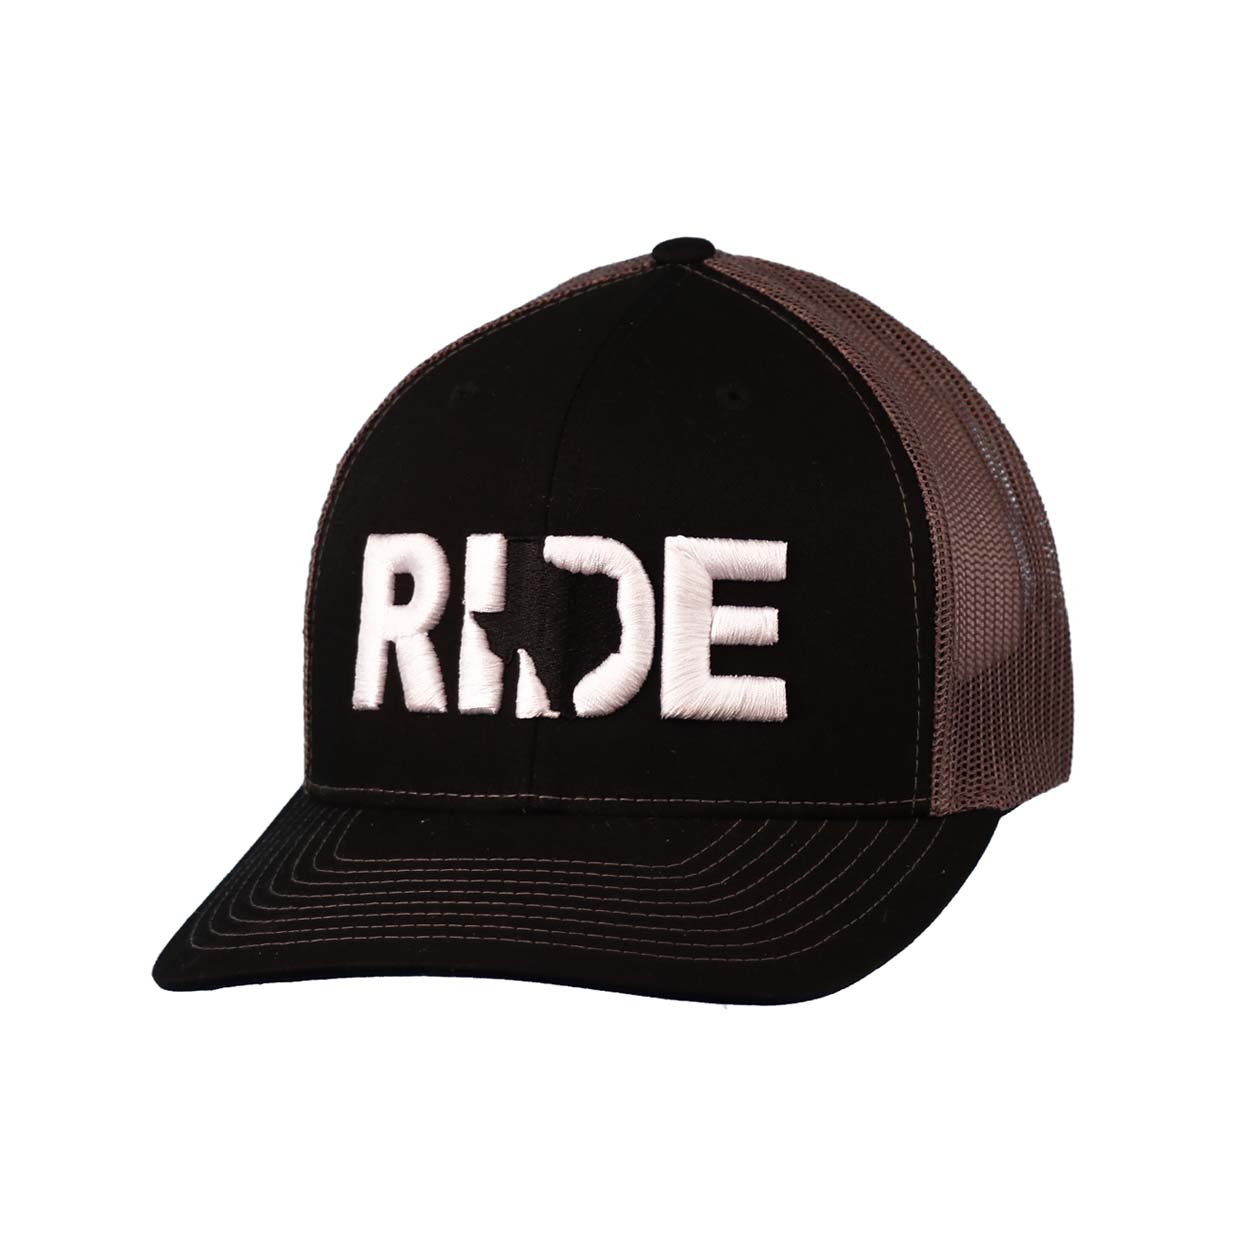 Ride Texas Classic Embroidered Snapback Trucker Hat Black/Charcoal